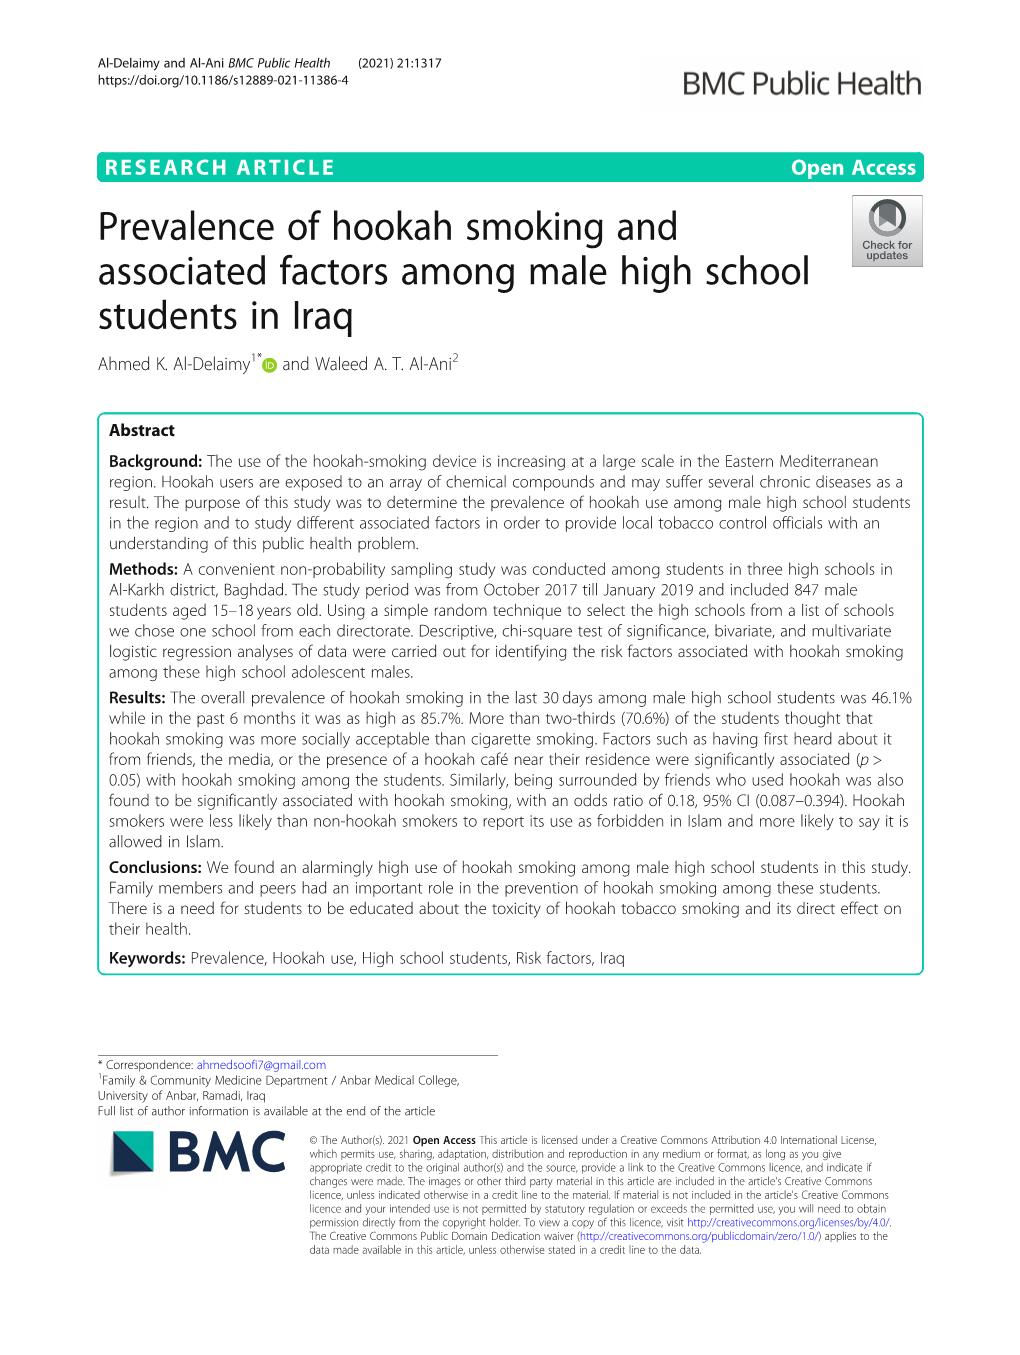 Prevalence of Hookah Smoking and Associated Factors Among Male High School Students in Iraq Ahmed K